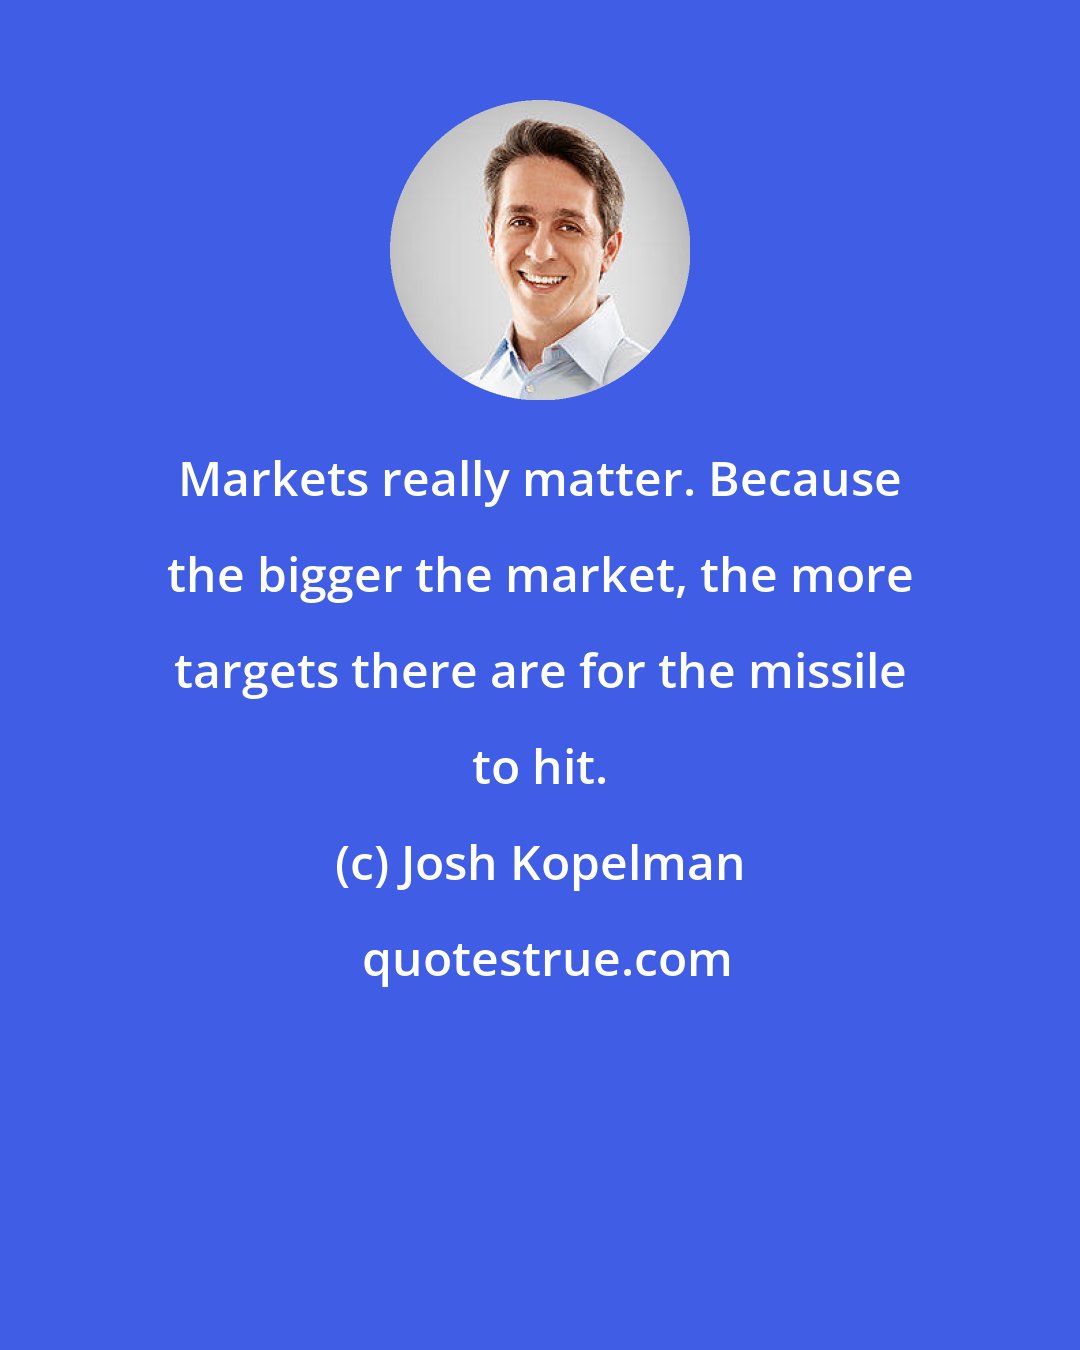 Josh Kopelman: Markets really matter. Because the bigger the market, the more targets there are for the missile to hit.